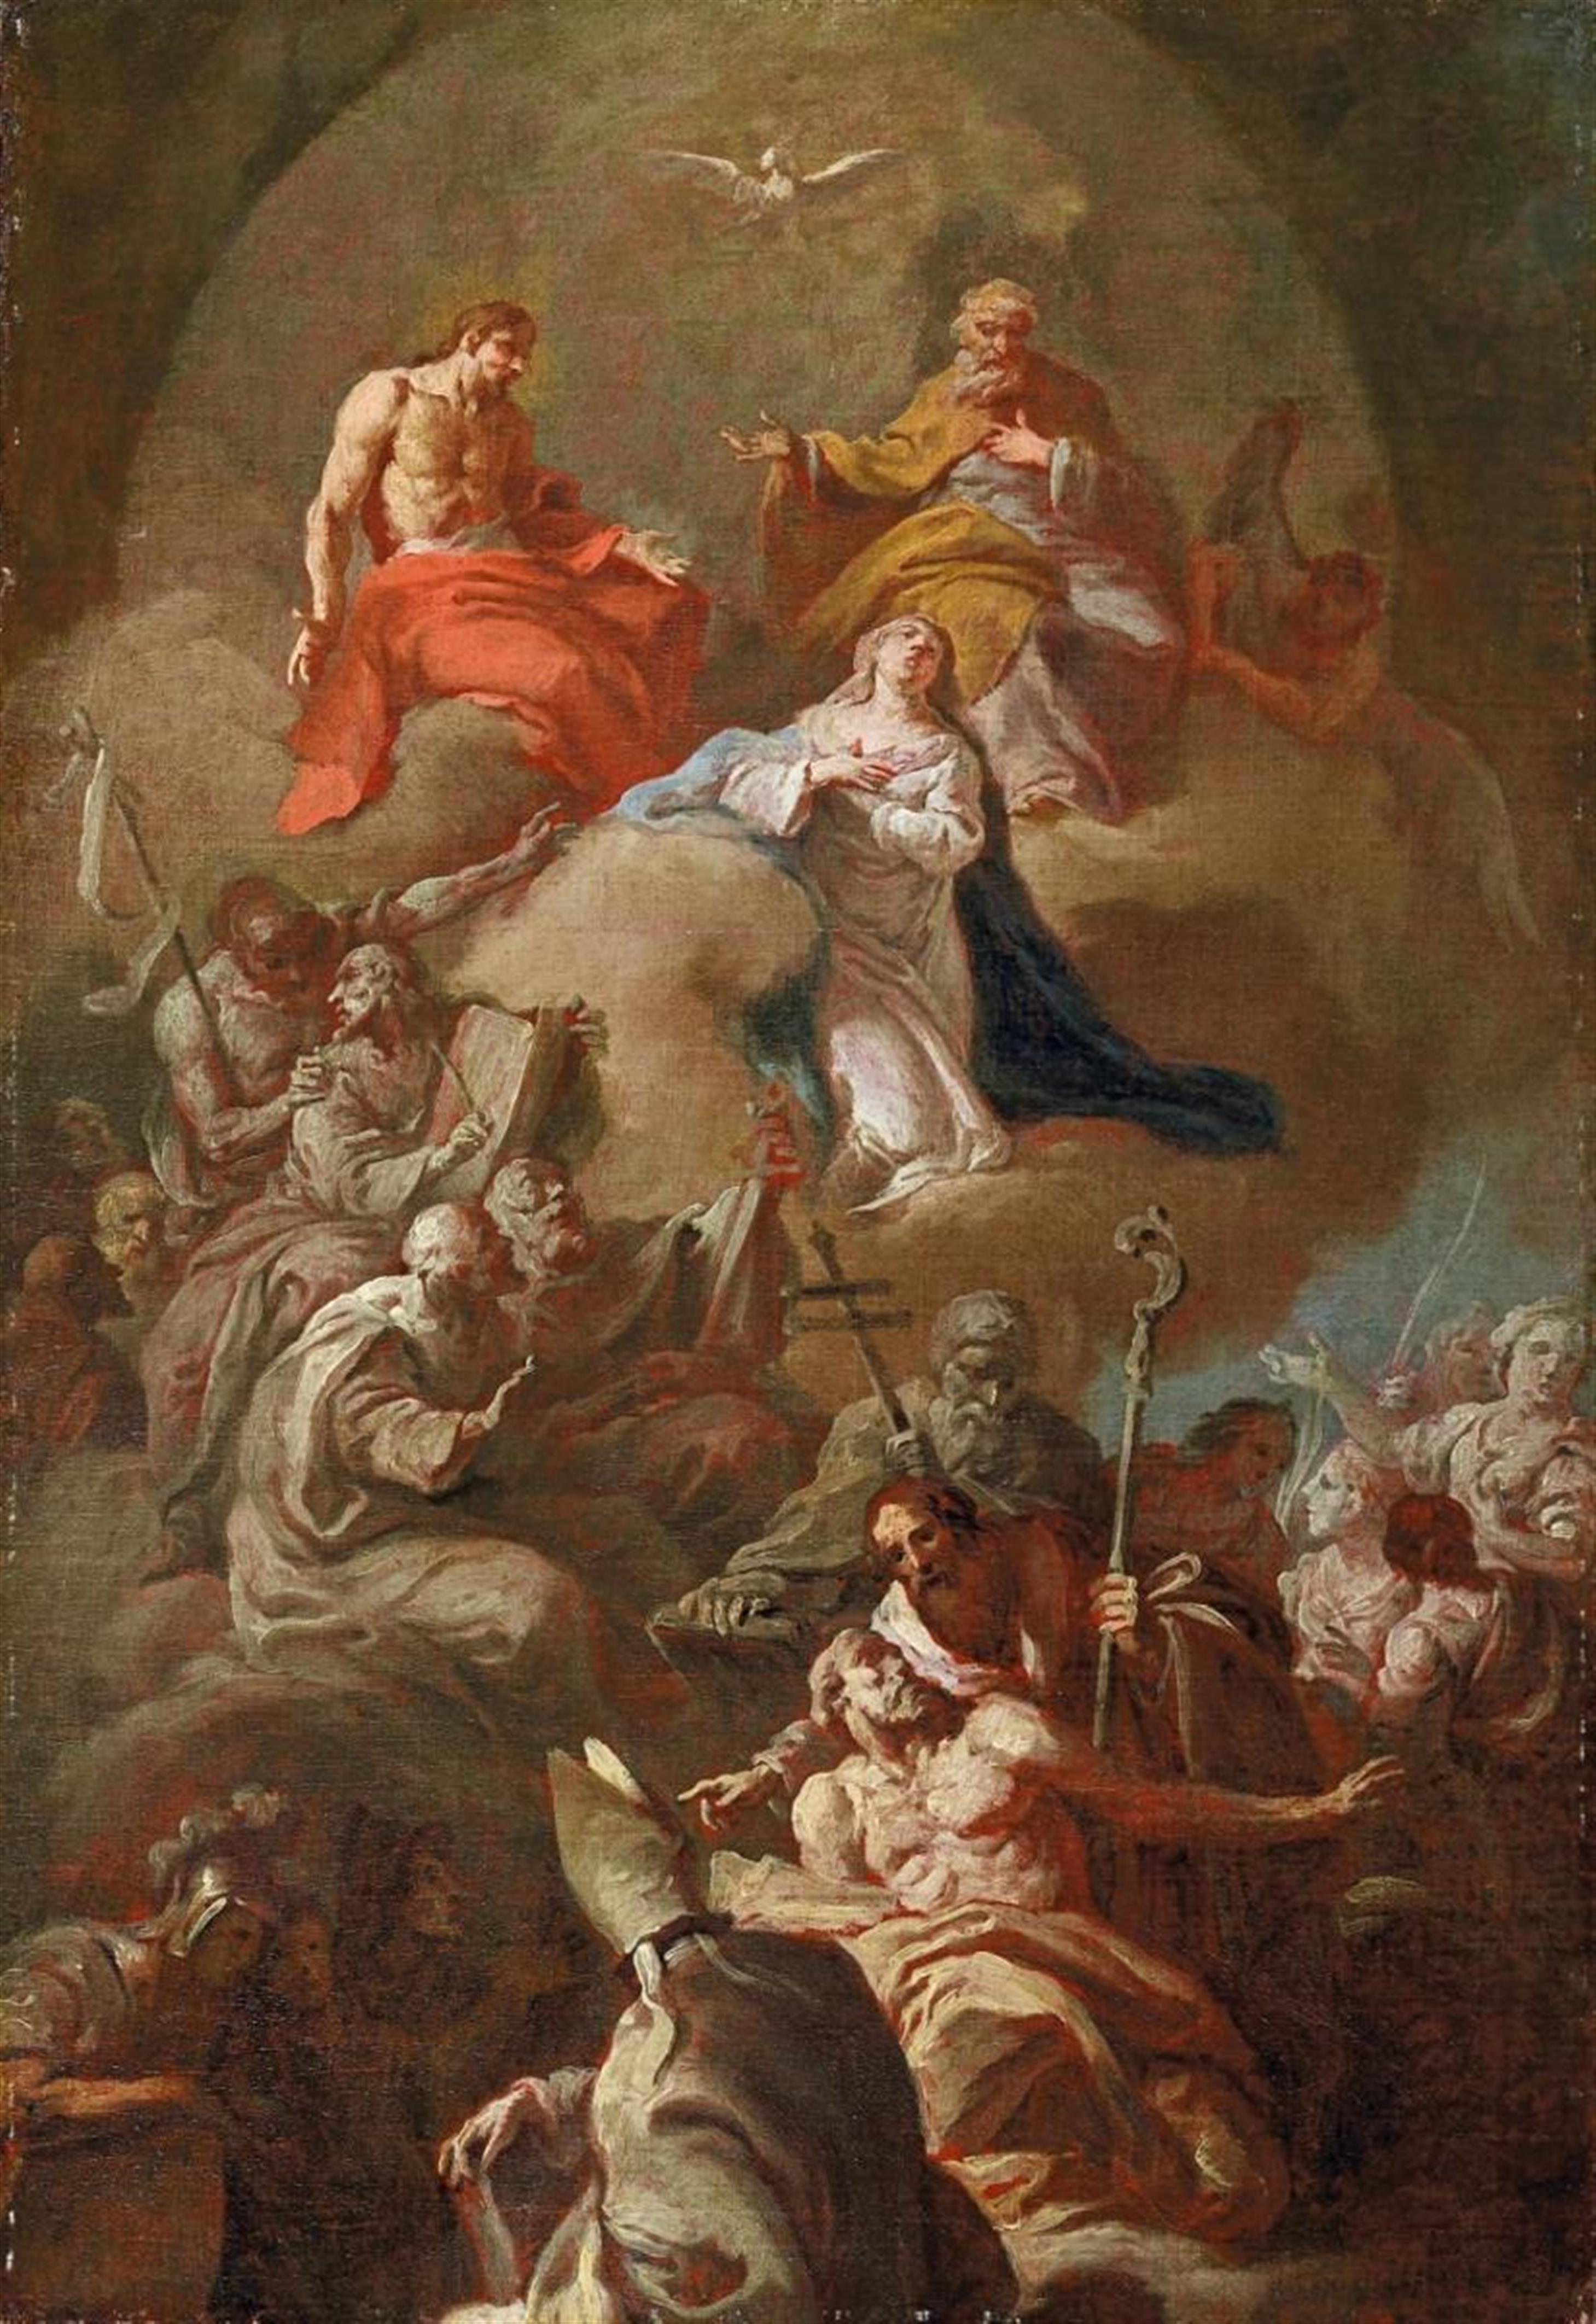 South German School, 18th century - THE ASCENSION - image-1